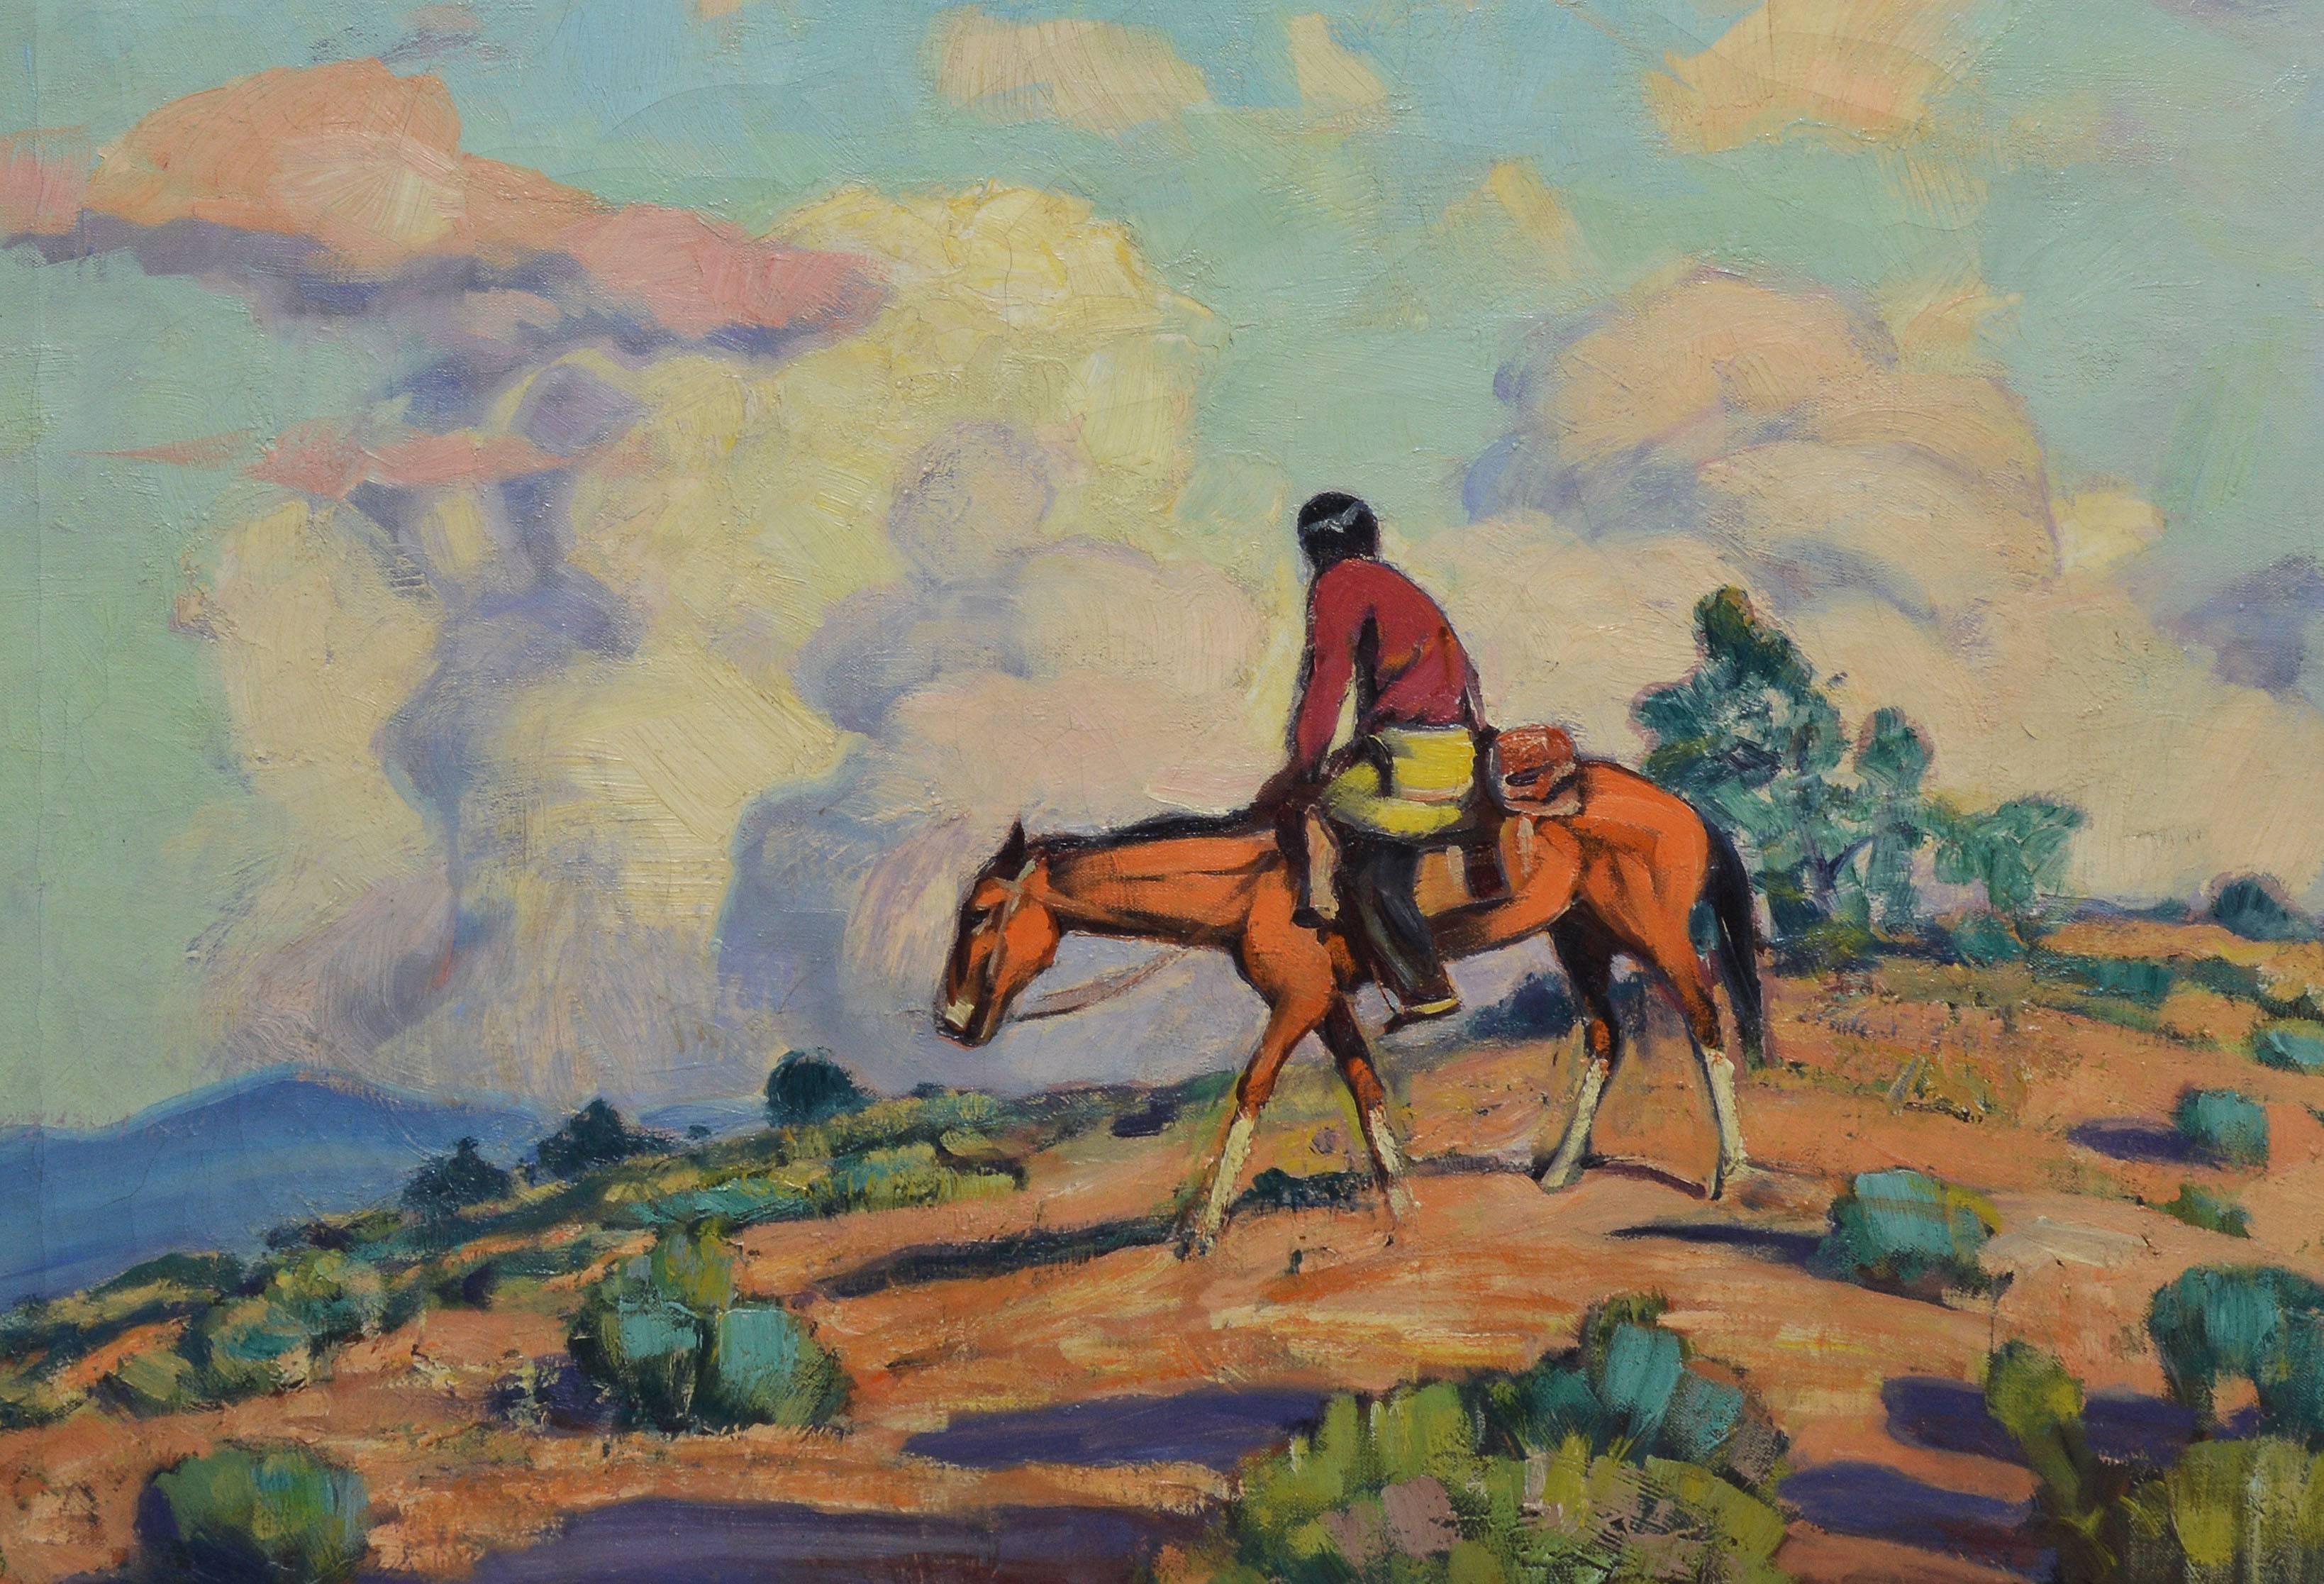 Taos School Landscape with Pueblo Indian on Horseback by Harold Betts - Impressionist Painting by Harold Harrington Betts